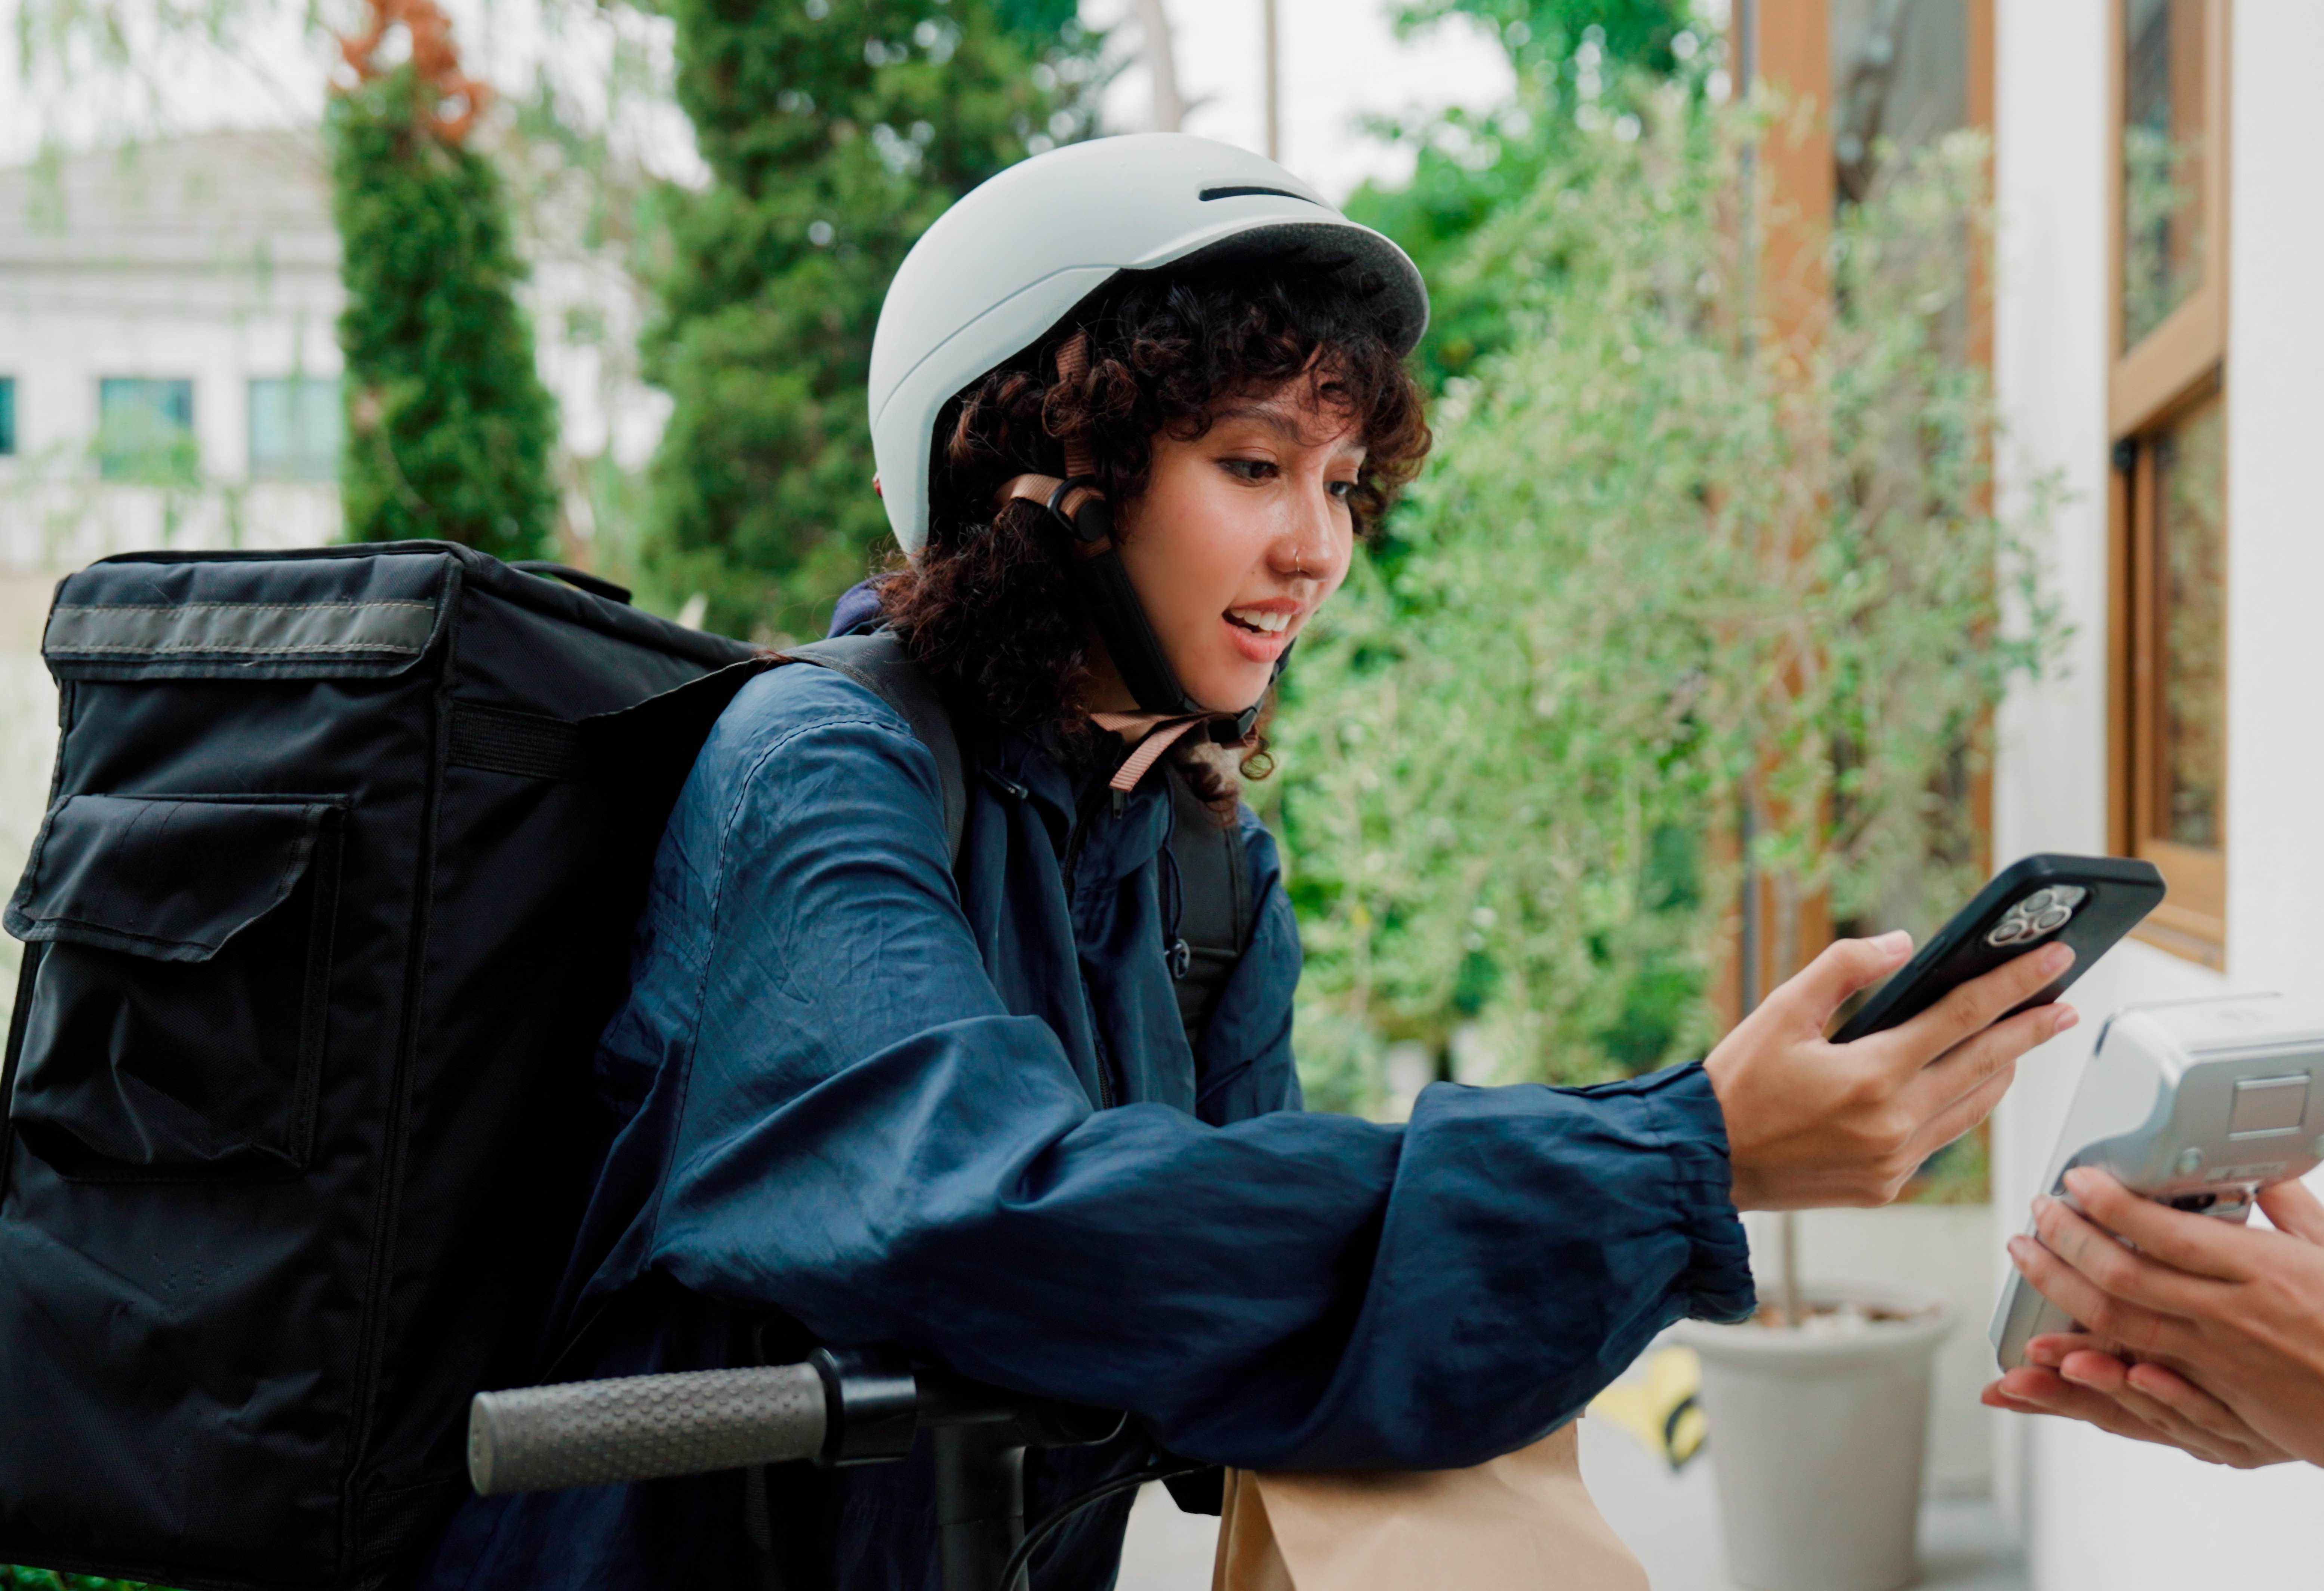 A young woman working as a delivery cyclist